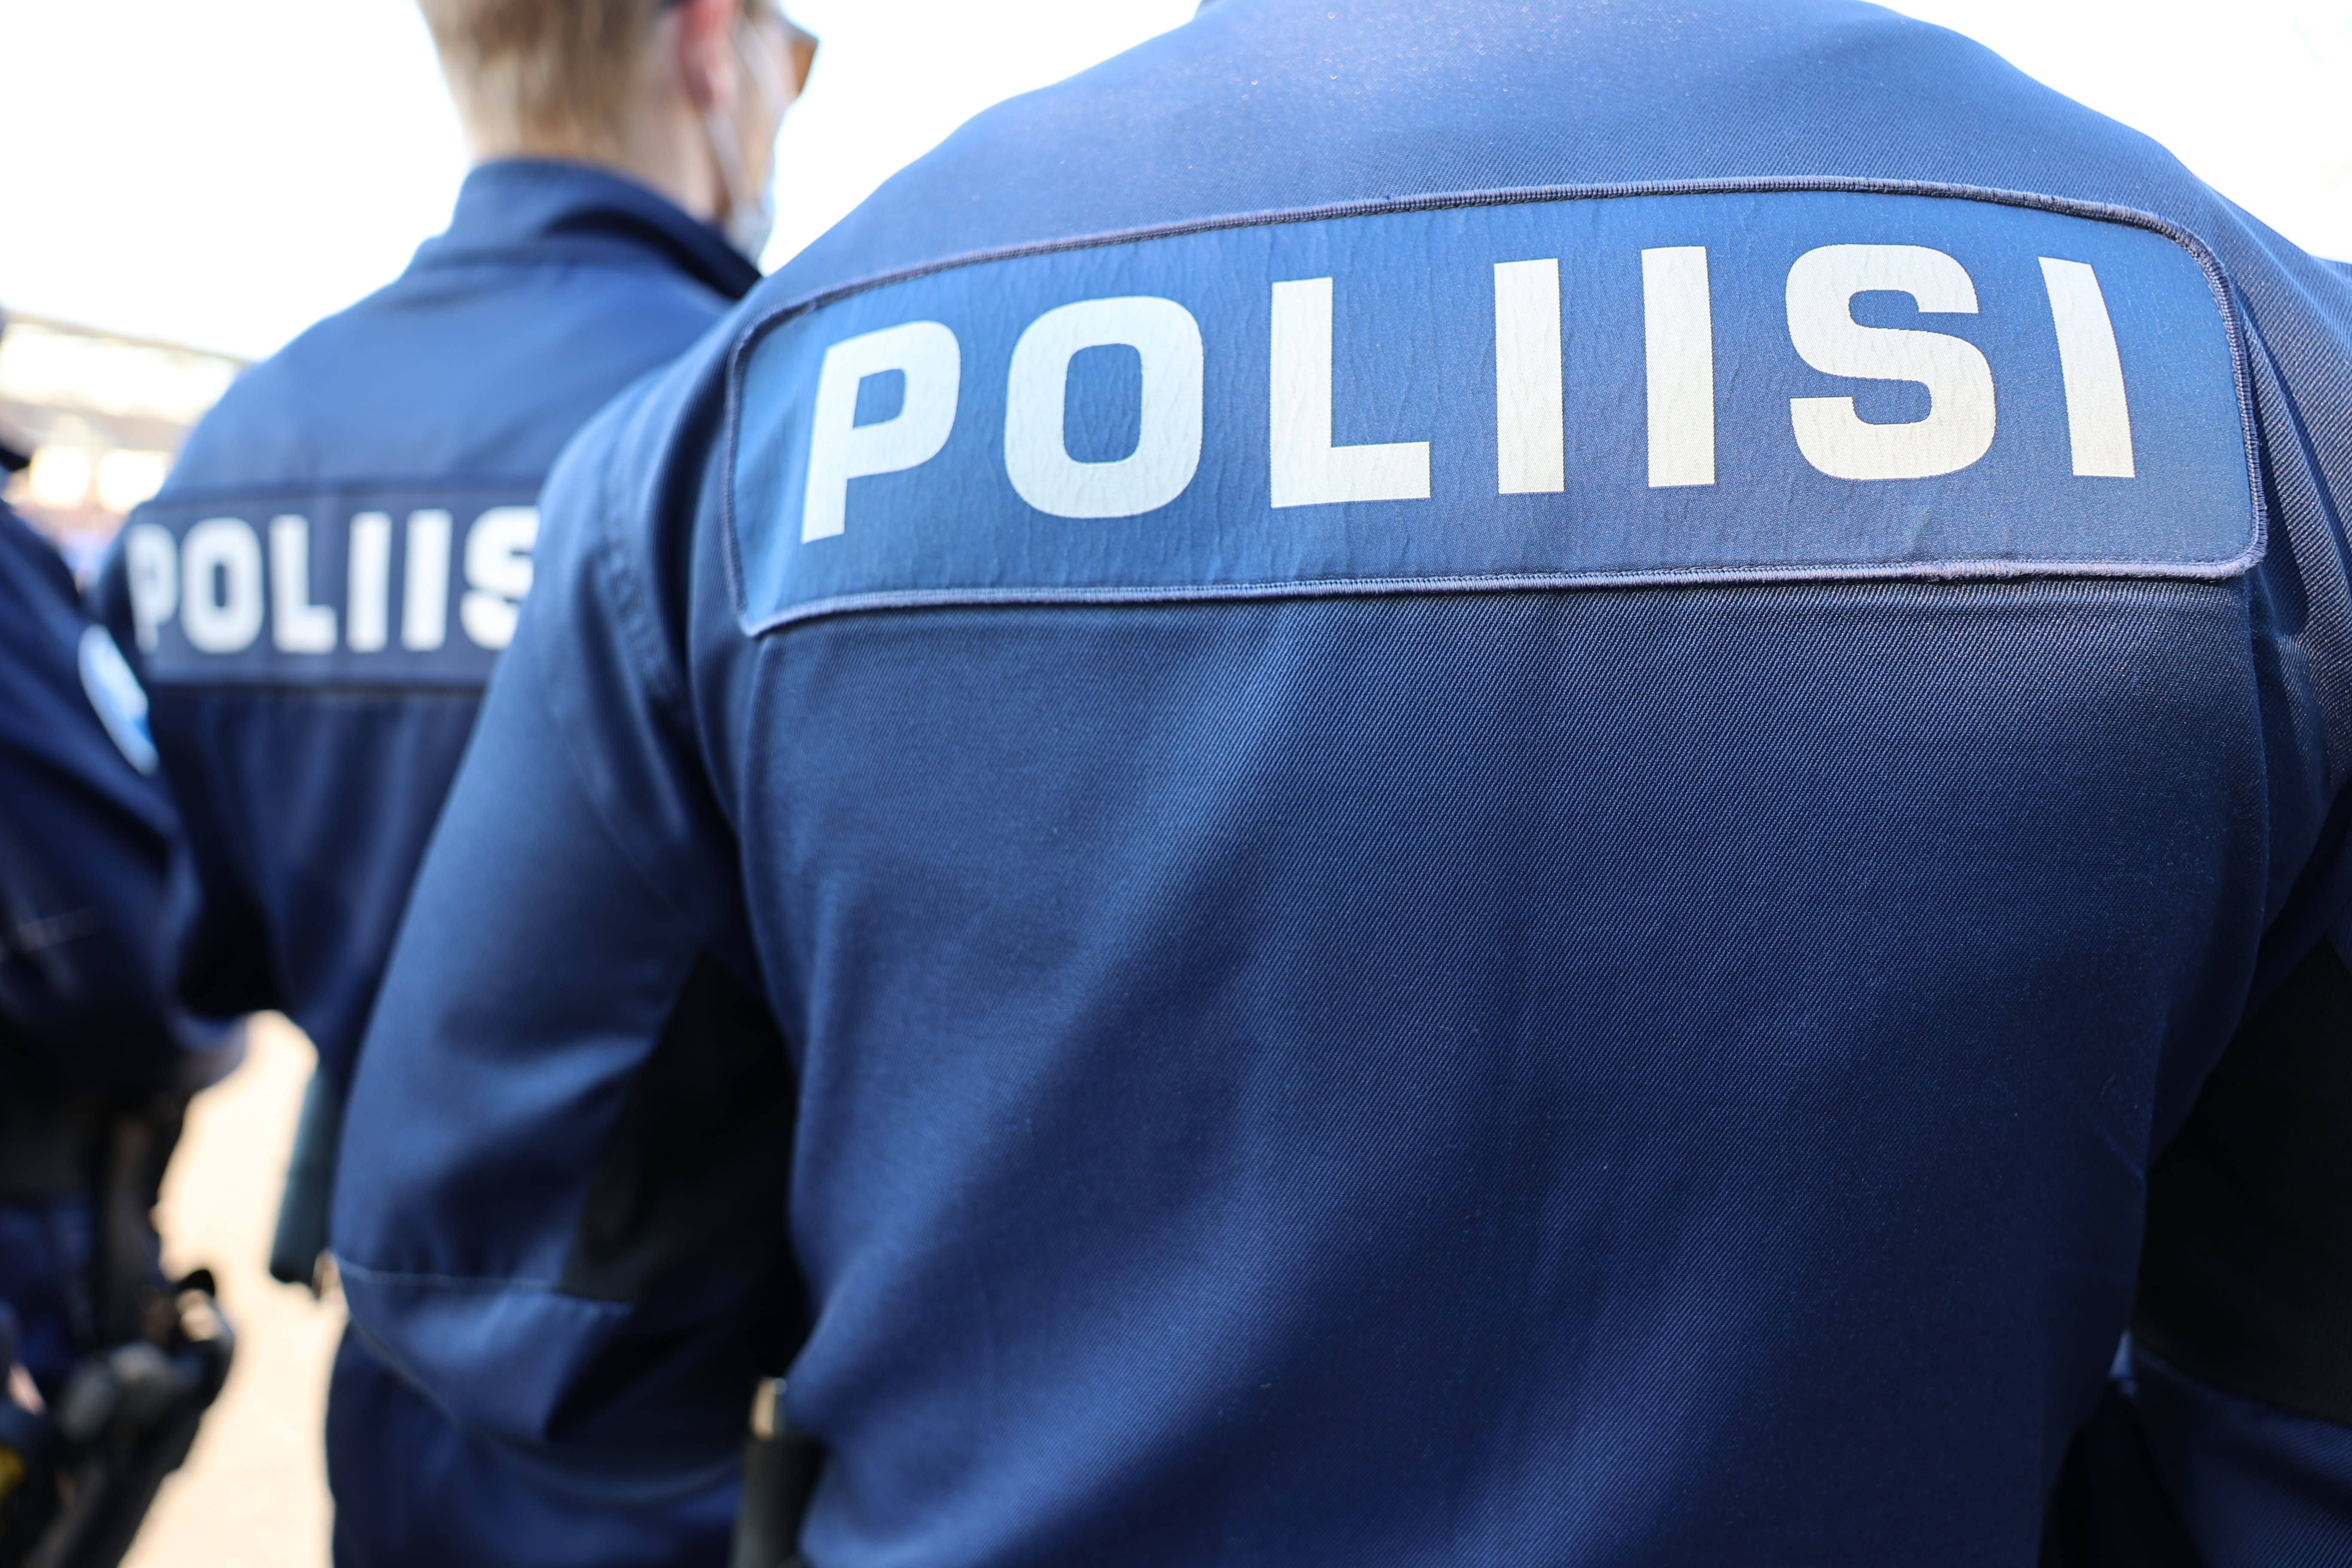 The Turku police are investigating dozens of threatening placards